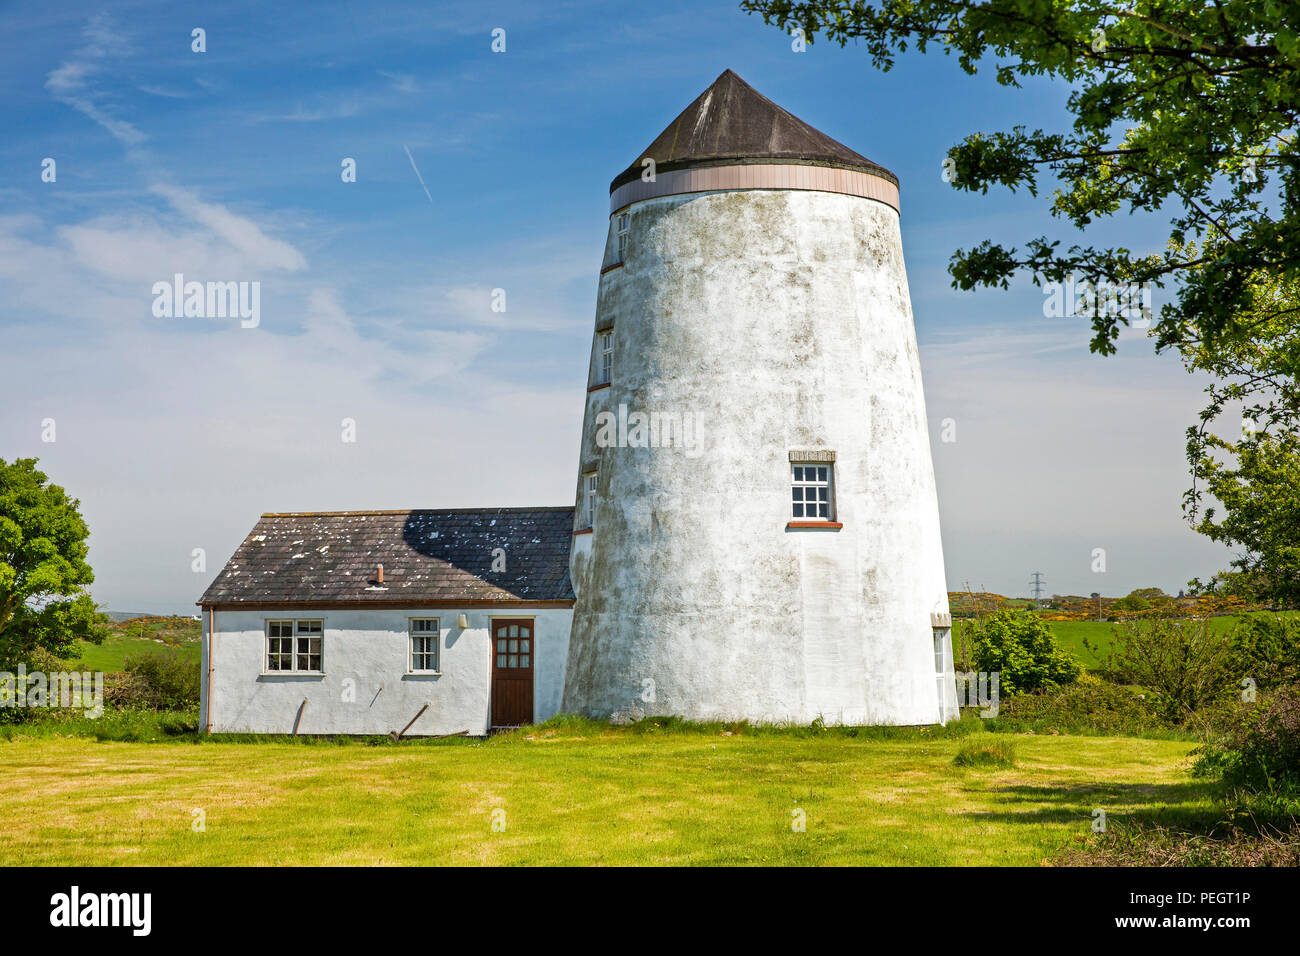 UK, Wales, Anglesey, Llanfechell, old redundant windmill converted into house Stock Photo